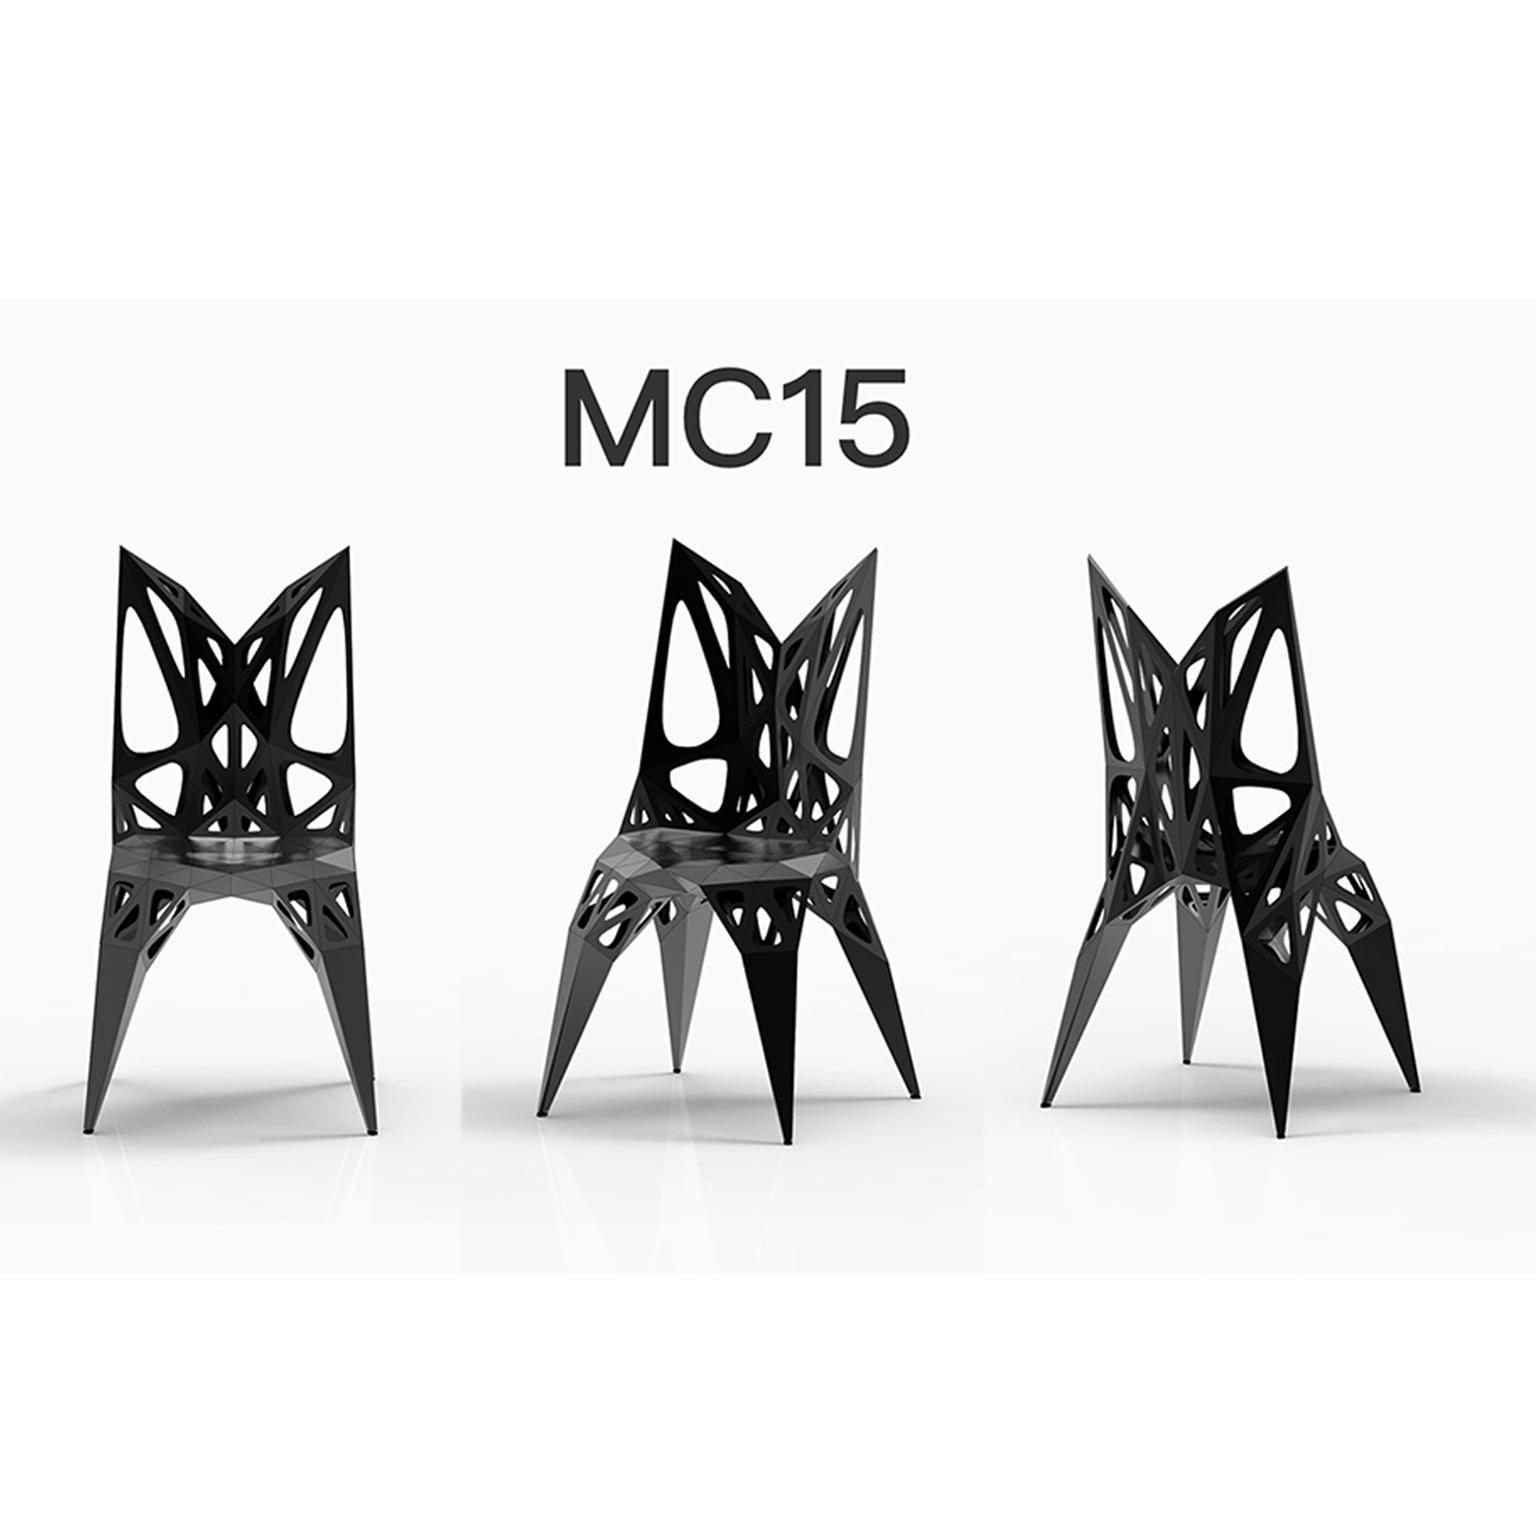 Customizable
outdoor+indoor
3 official types chairs / available
solid
dots
frame
2 colors official / available / finish in polish/matt
black
silver

Furniture designer Zhoujie Zhang is known for the integration of automated digital design and